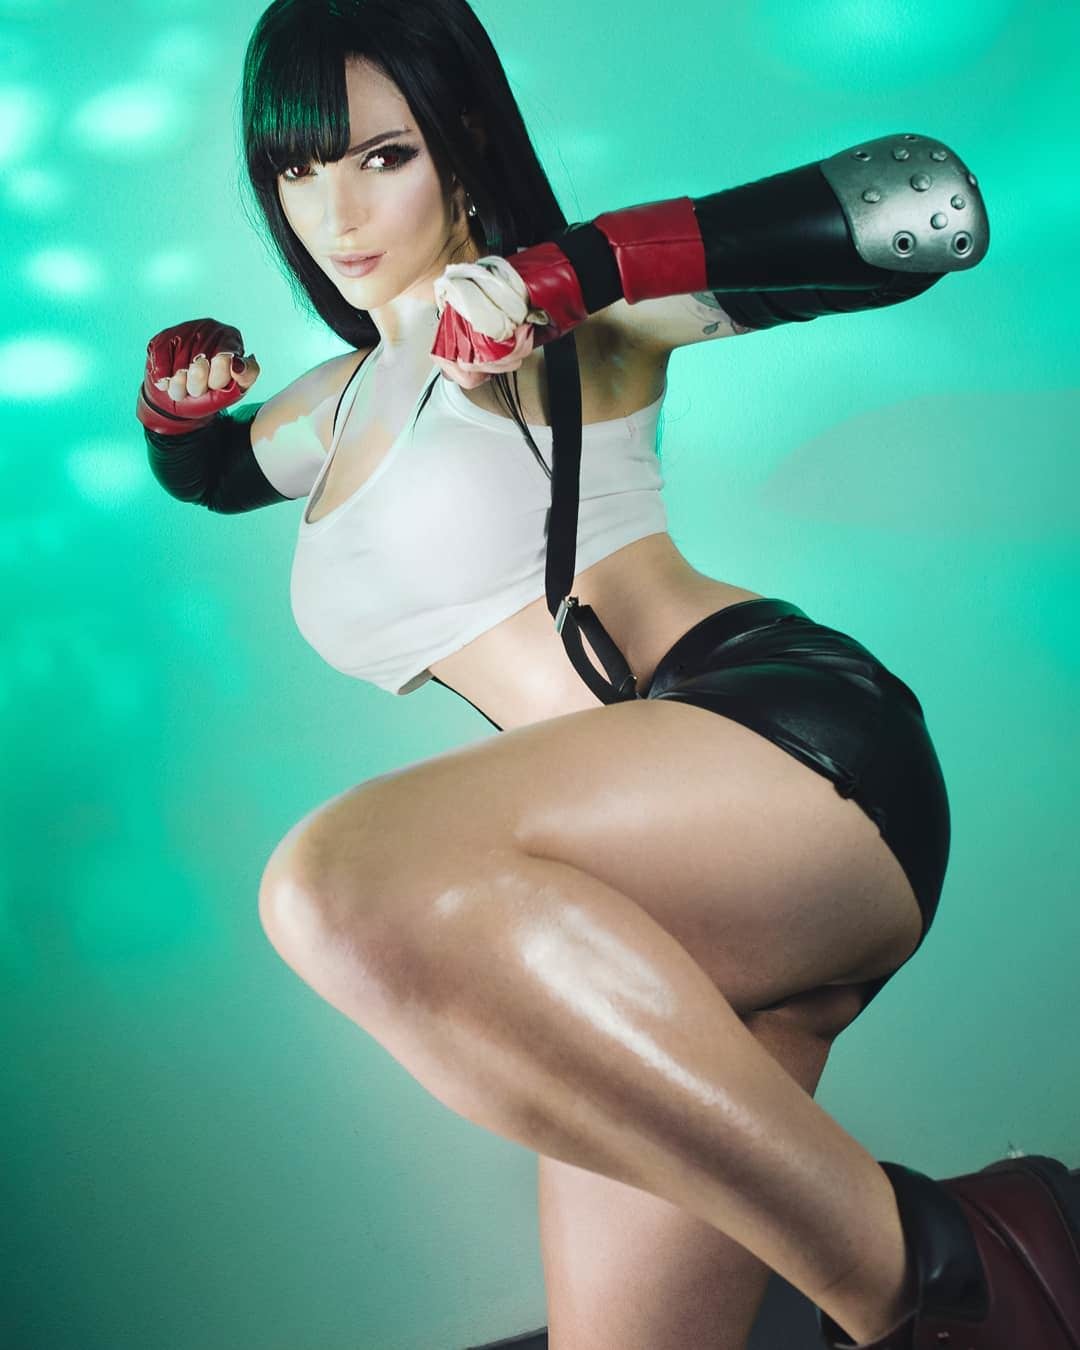 21 Talented Cosplayers Show Off Their Hottest Looks Ftw Gallery